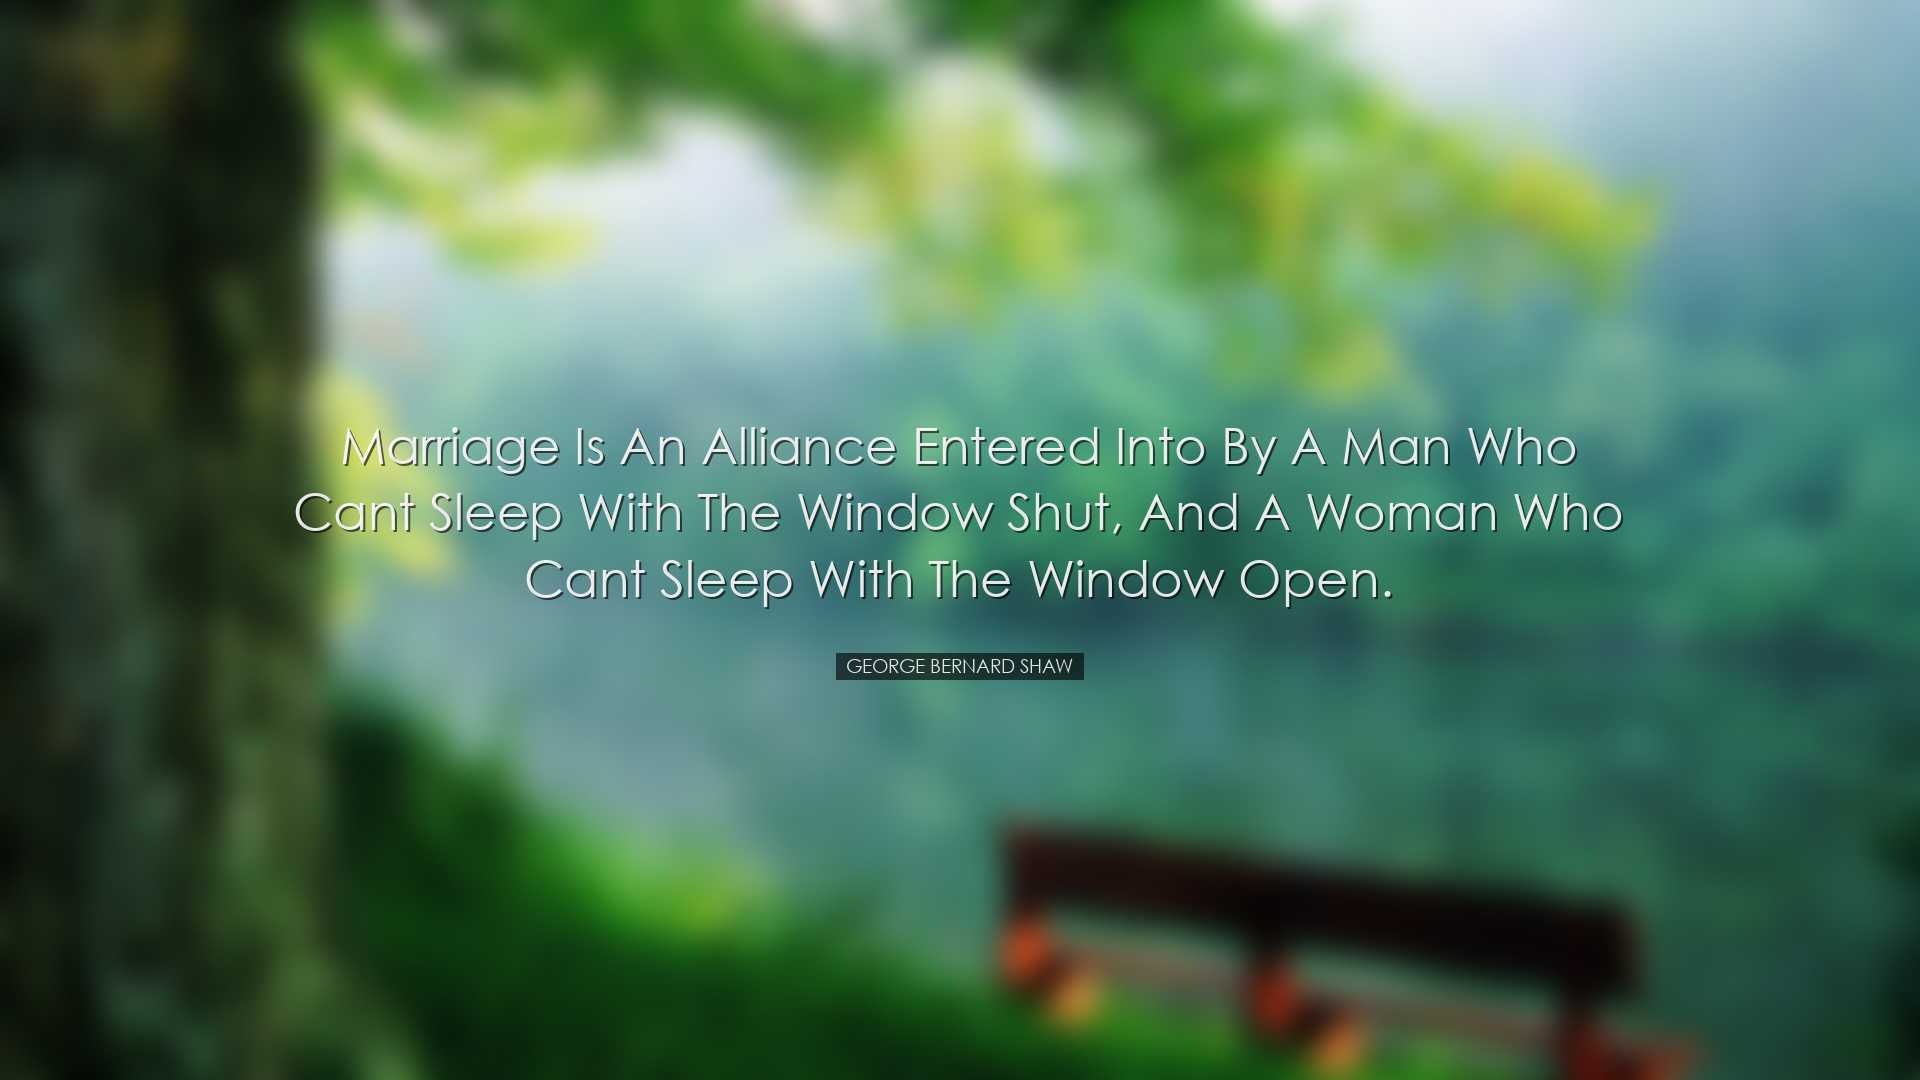 Marriage is an alliance entered into by a man who cant sleep with